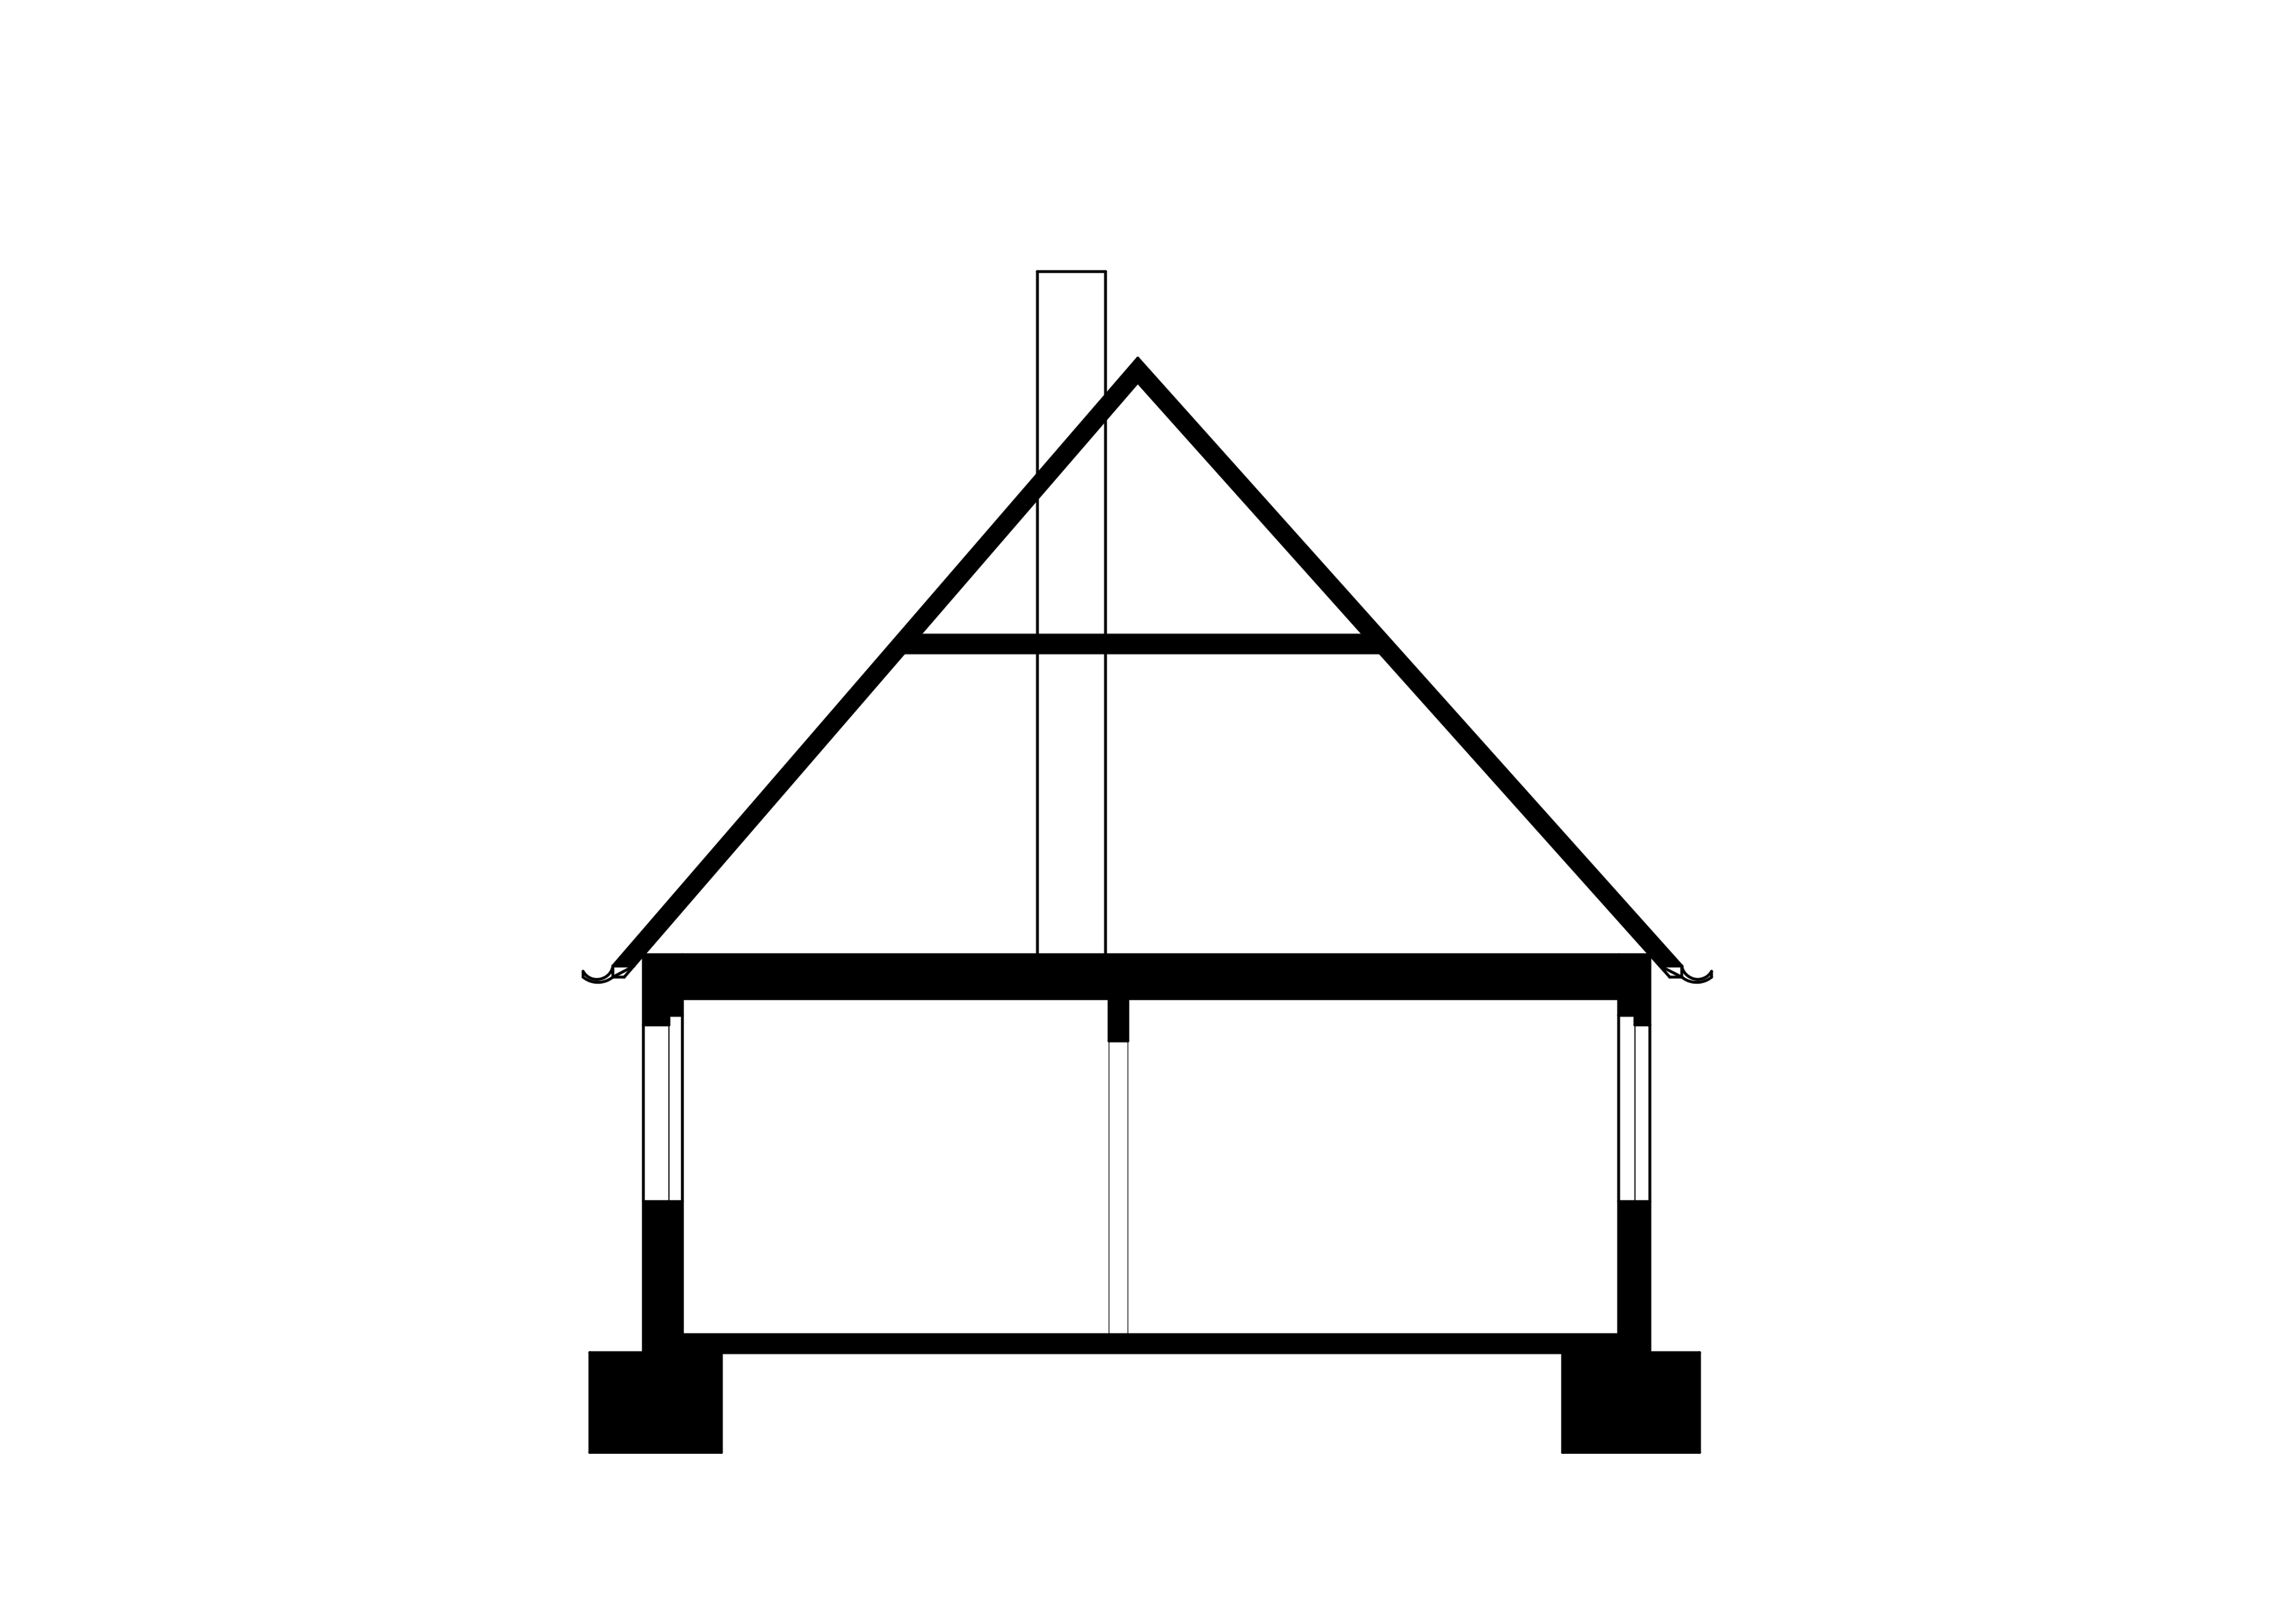 Sectional drawing house